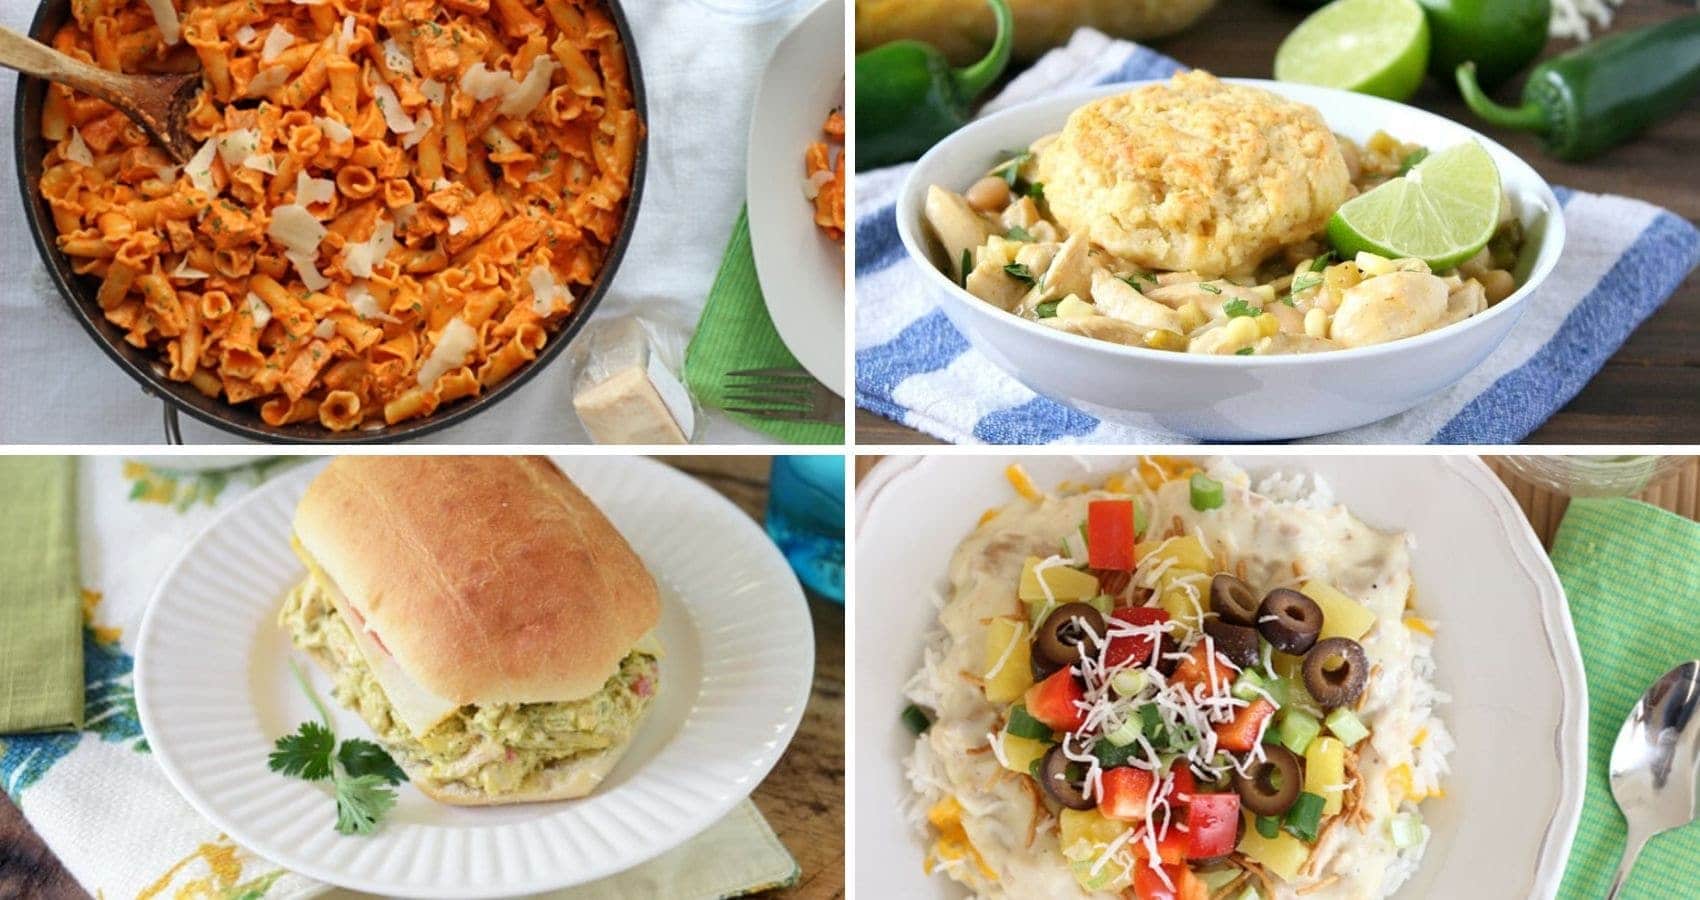 50+ Rotisserie Chicken Recipes for Dinner At Home - Or so she says...